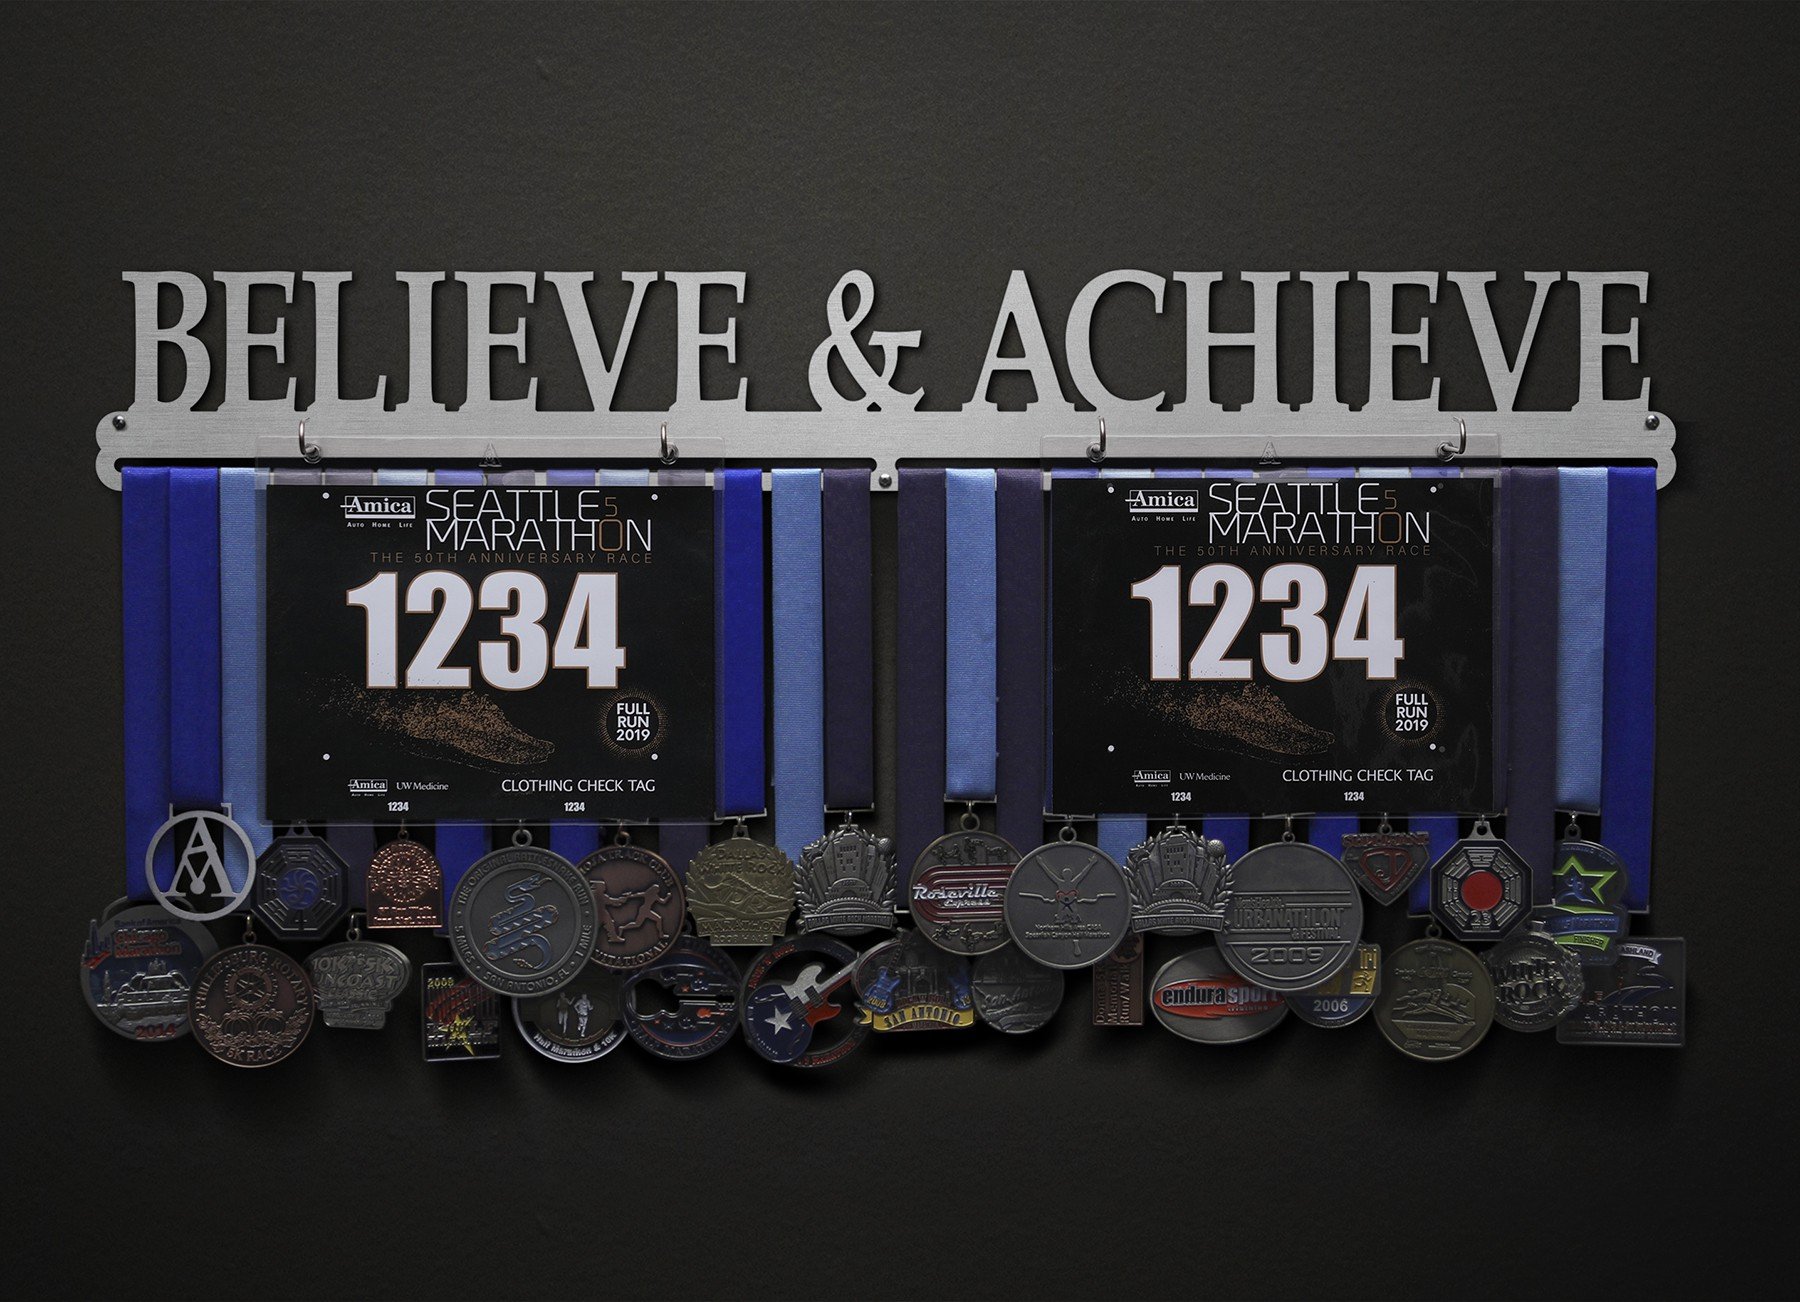 Believe and Achieve Bib and Medal Display